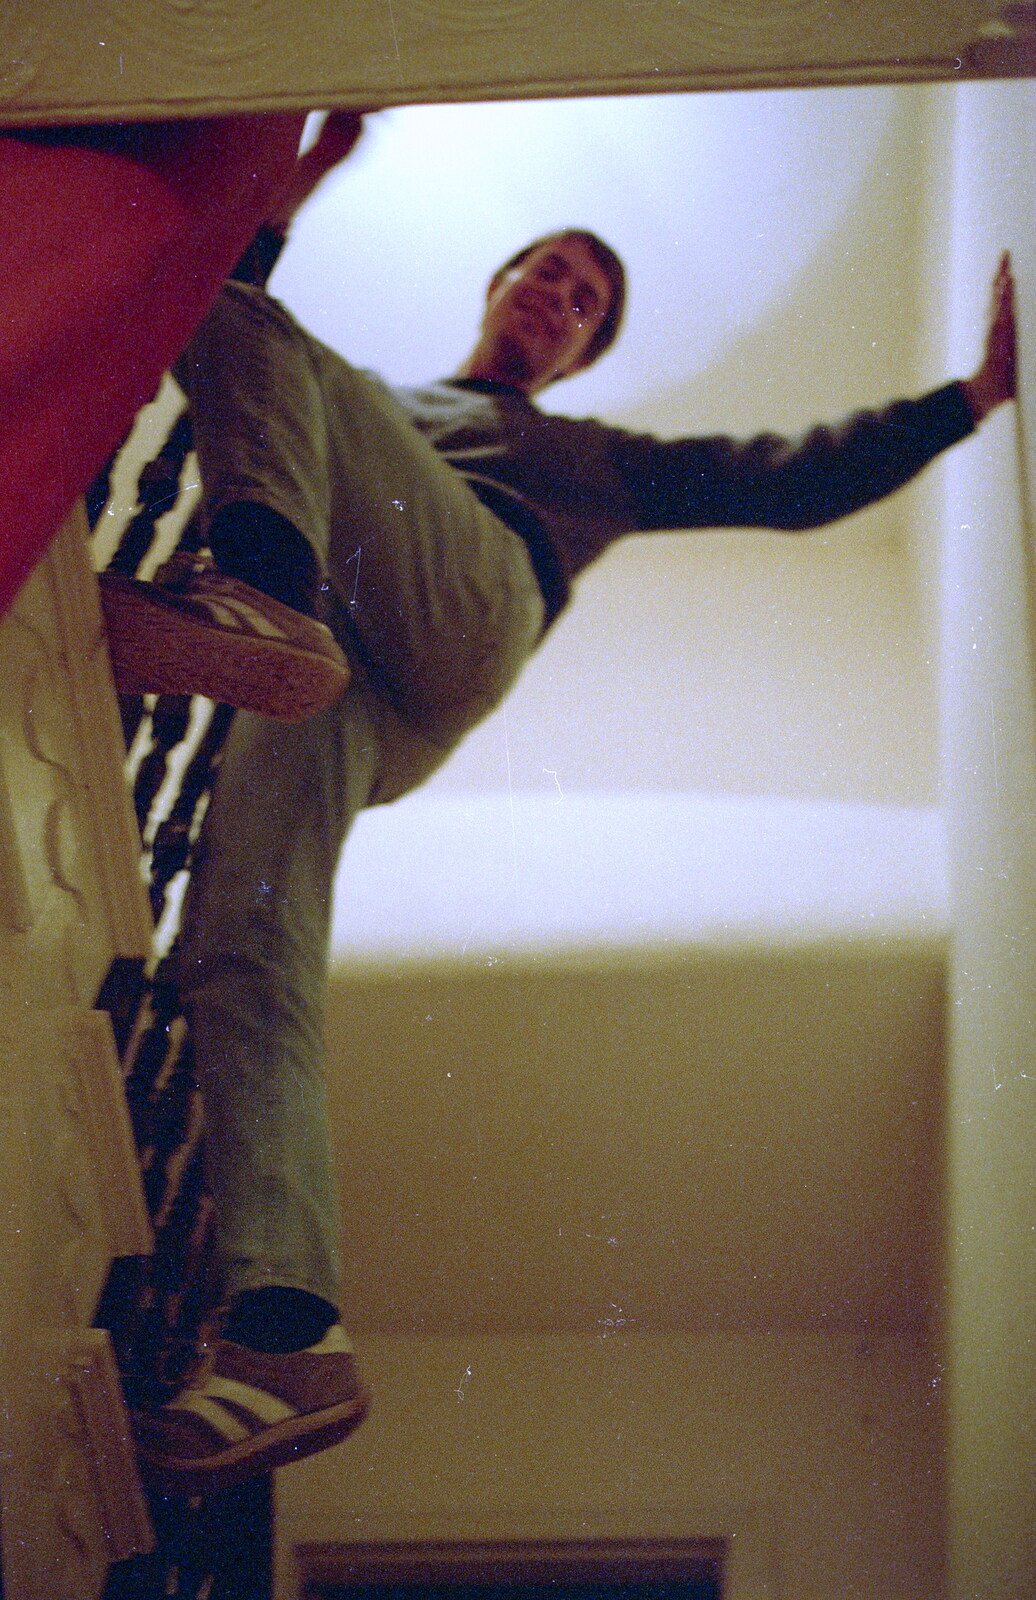 Malcolm climbs over the banisters from Uni: First Weeks At Polytechnic, Umbrellas and a Visit From Liz, Plymouth - 26th September 1985